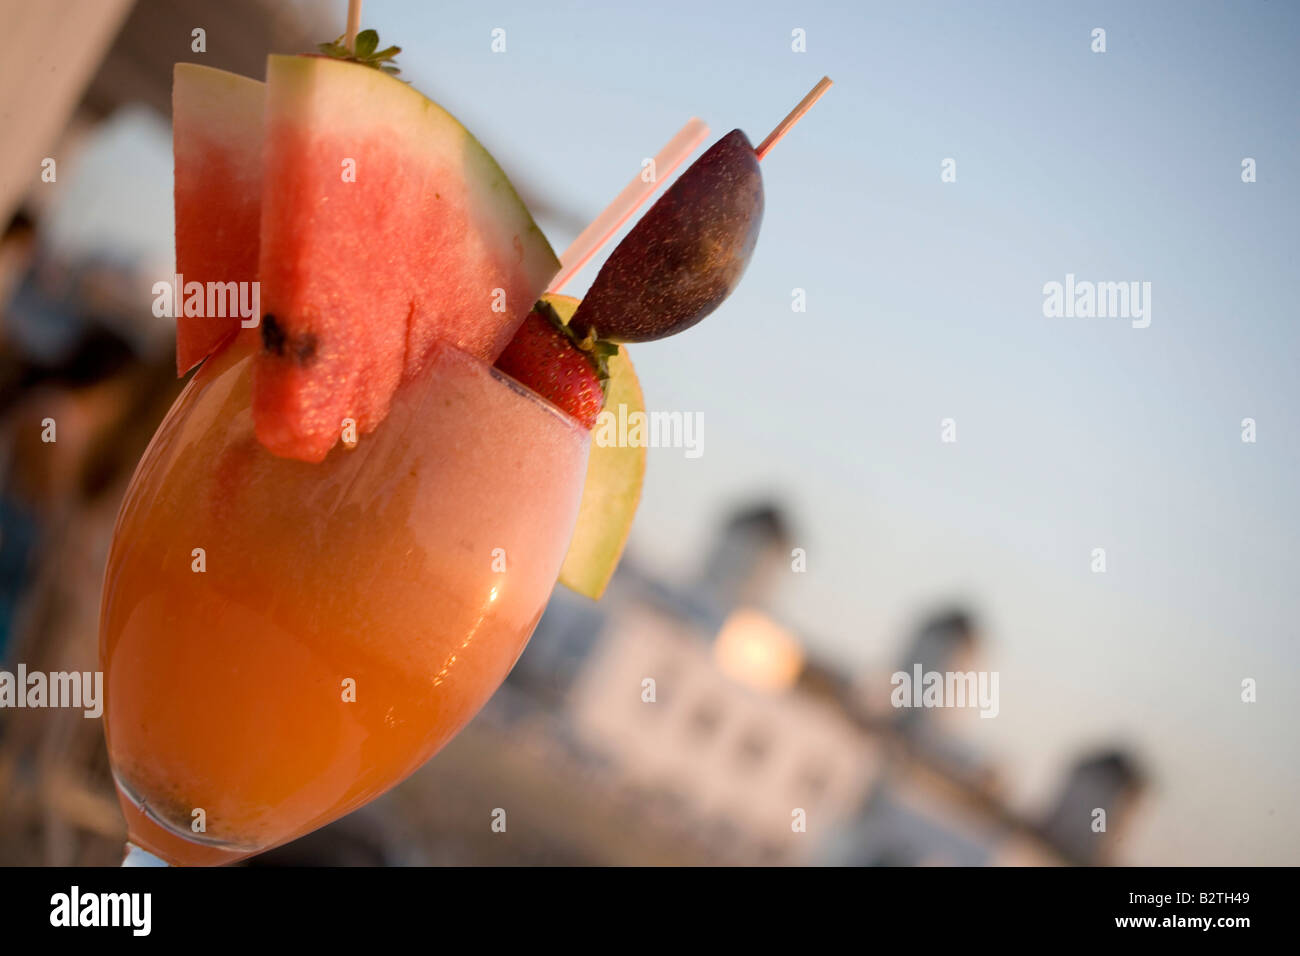 Caprice High Resolution Stock Photography and Images - Alamy